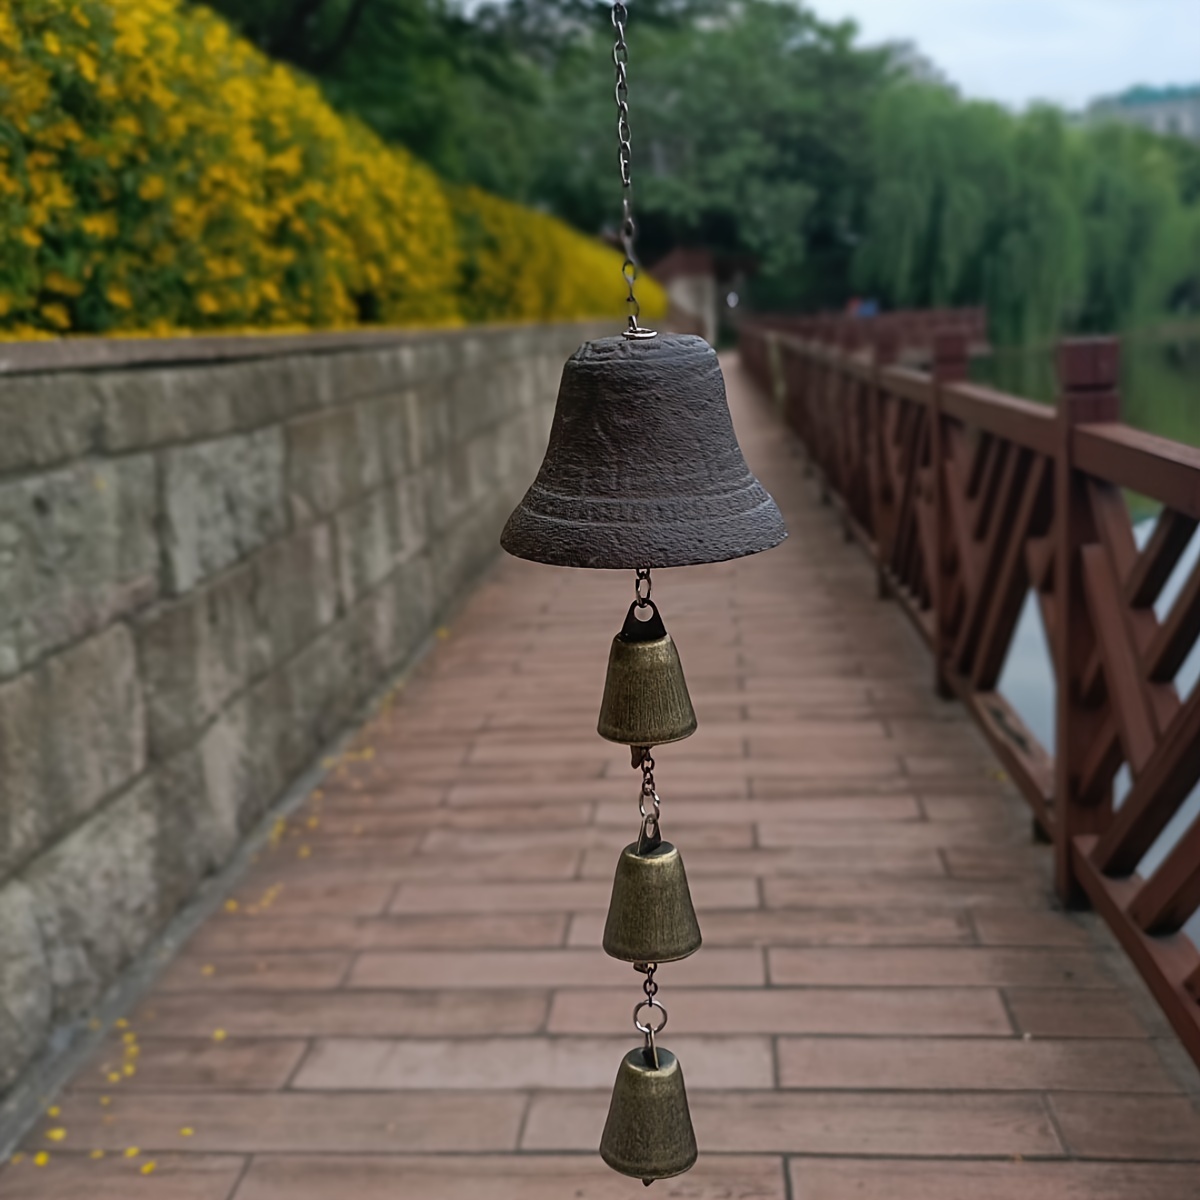 

Cast Iron Bell Wind Chime: Rustic Outdoor Decor For Your Garden Or Patio - No Battery Required